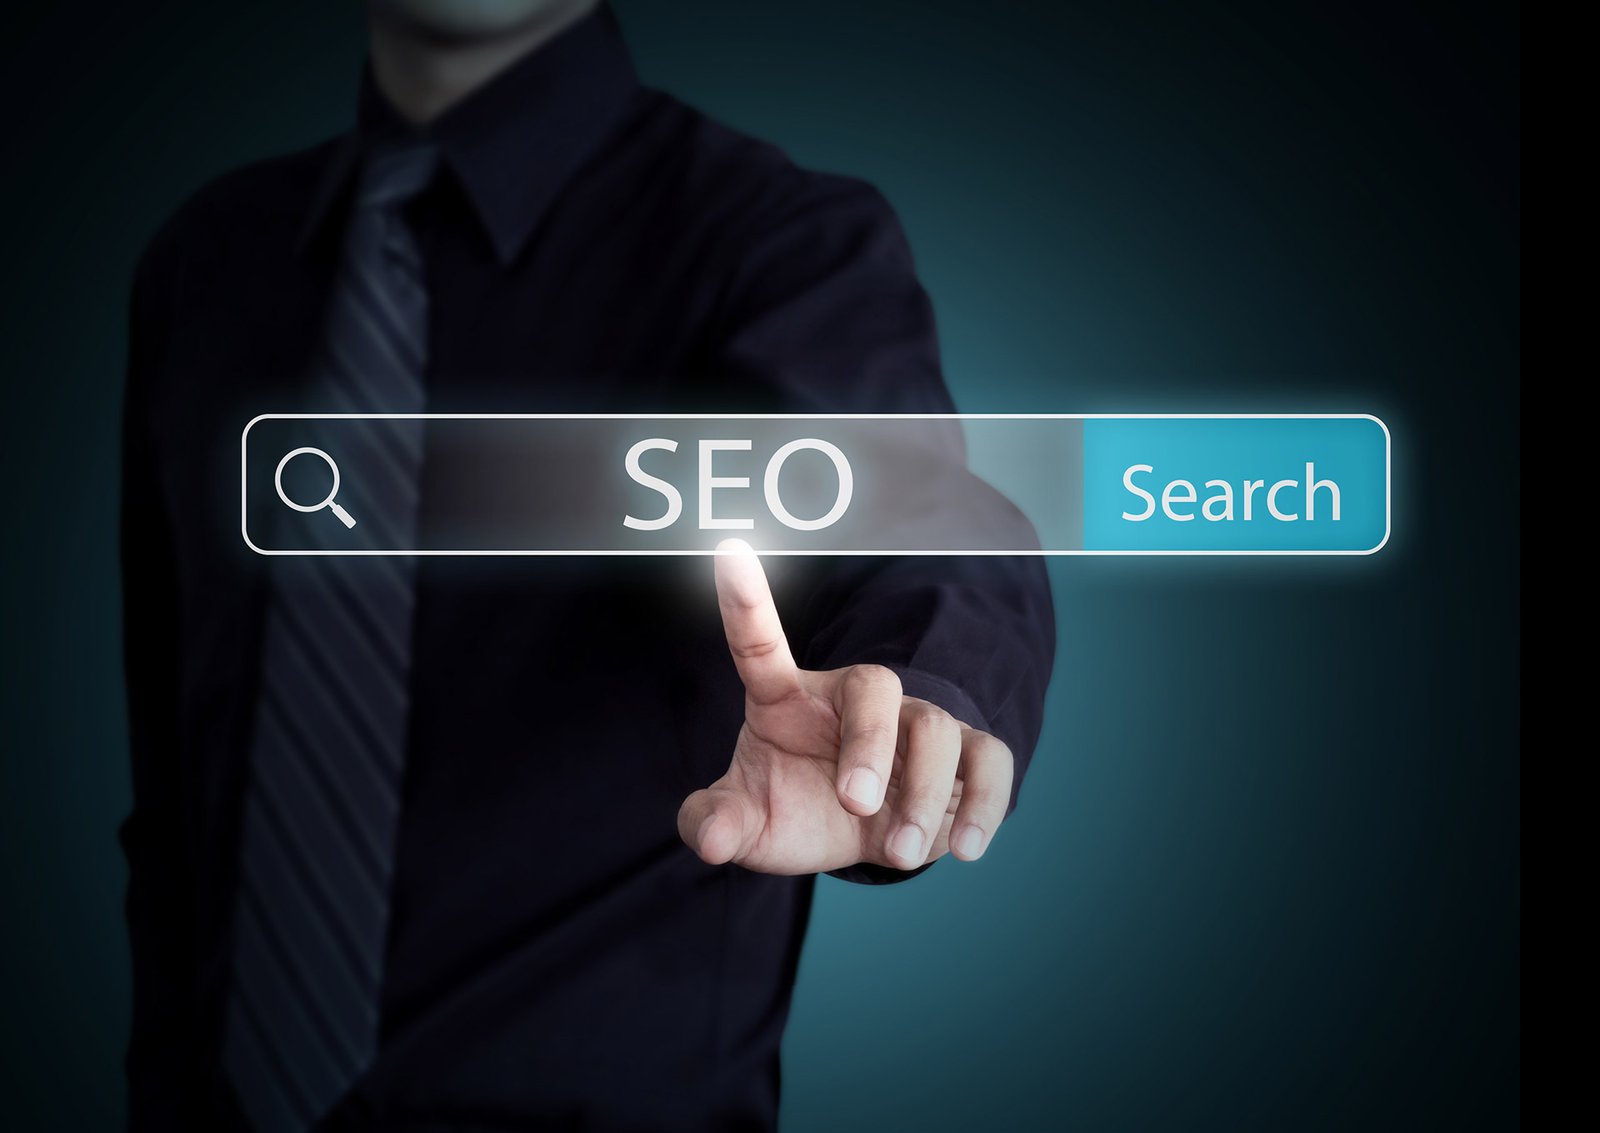 The Web Host’s Affect on SEO: What You Should Know